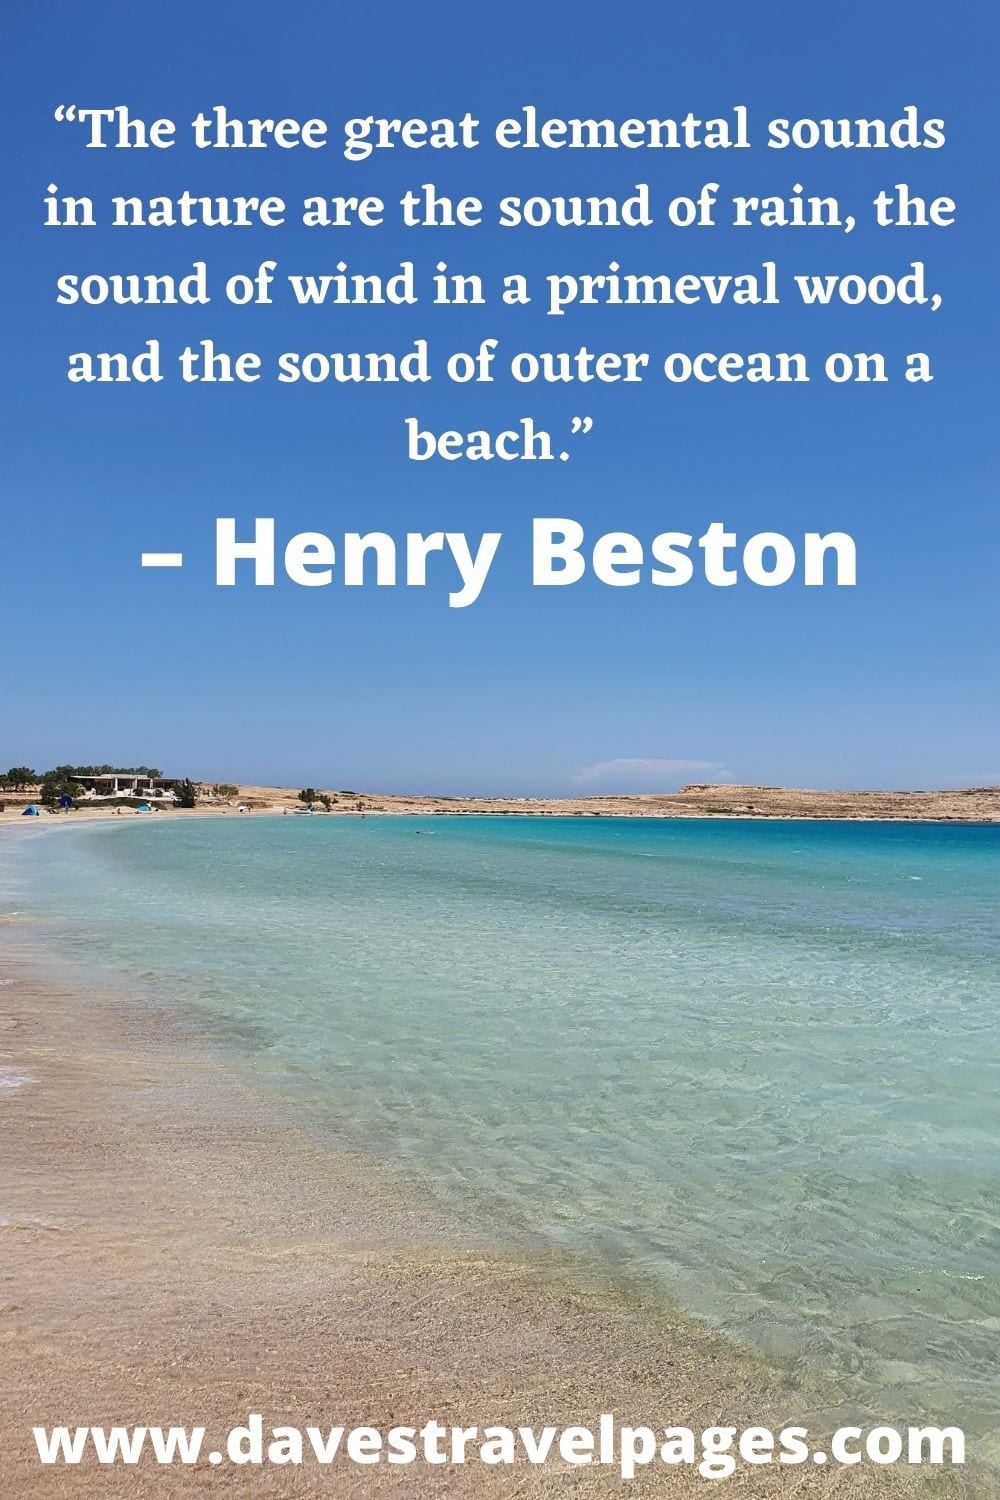 “The three great elemental sounds in nature are the sound of rain, the sound of wind in a primeval wood, and the sound of outer ocean on a beach.” – Henry Beston